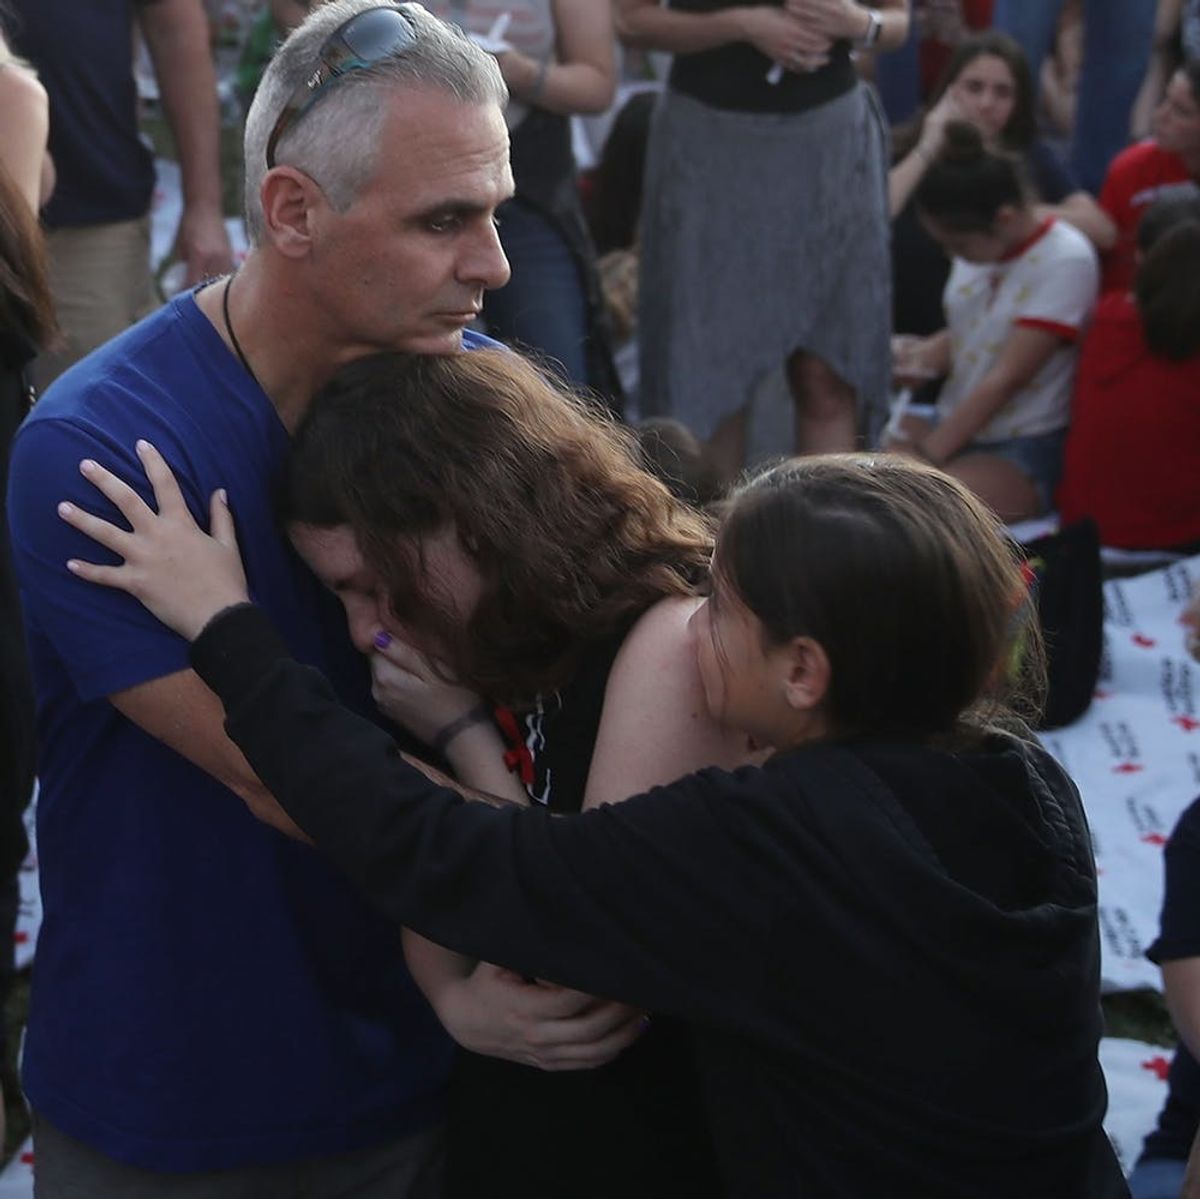 In the Aftermath of Wednesday’s Deadly School Shooting, a Nation Debates Next Steps